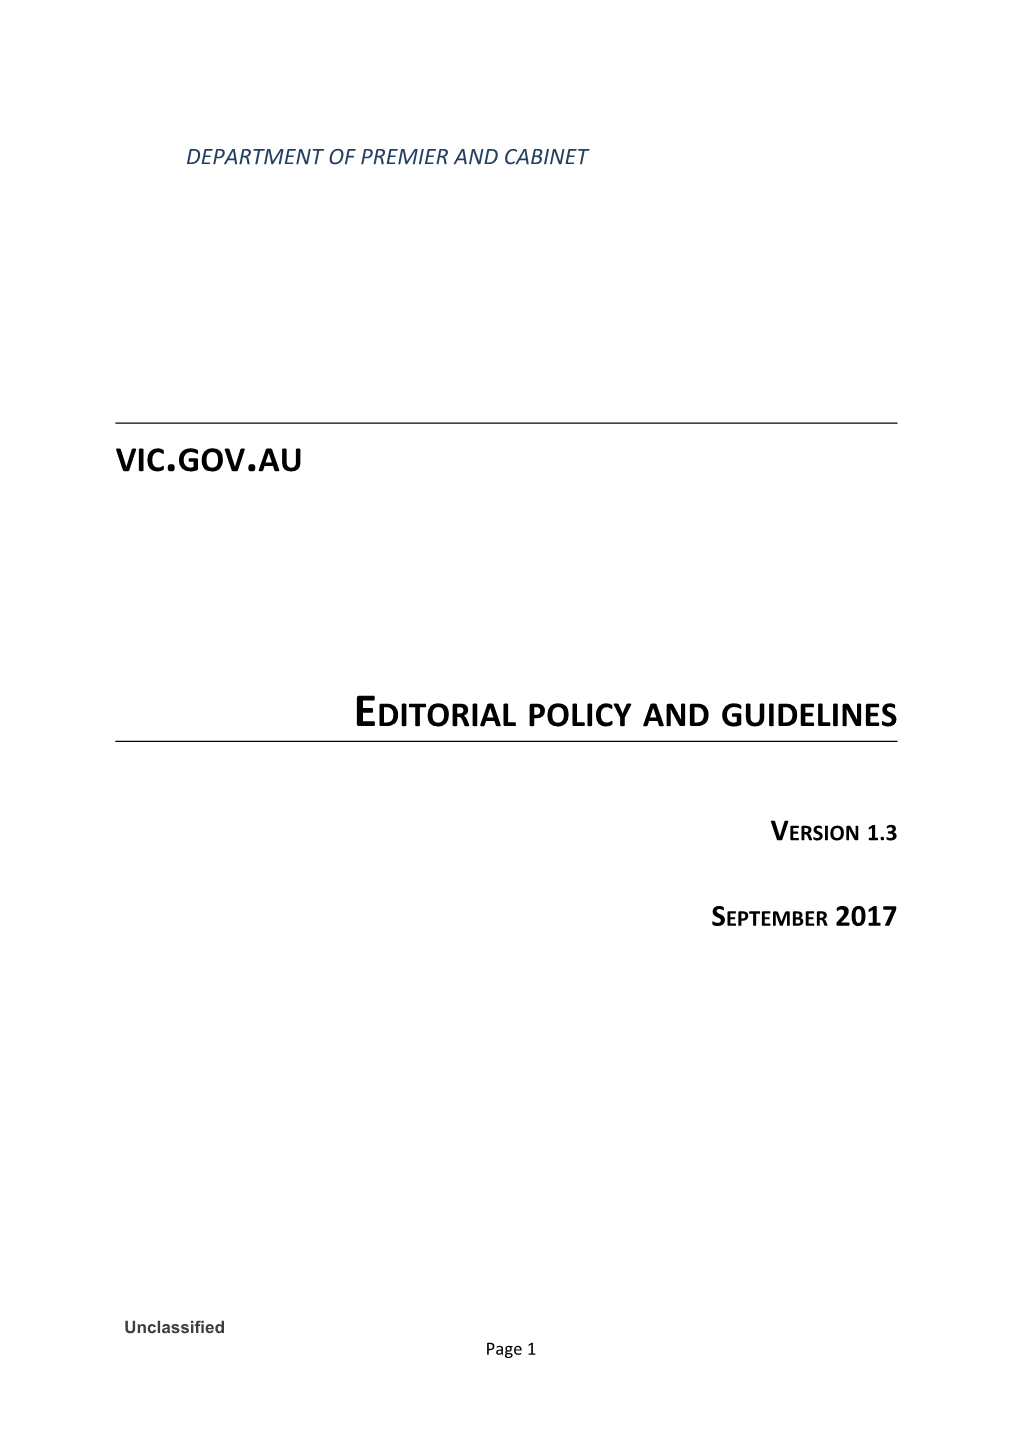 Vic.Gov.Au Editorial Policy and Guidelines - Version 1.2, September 2017